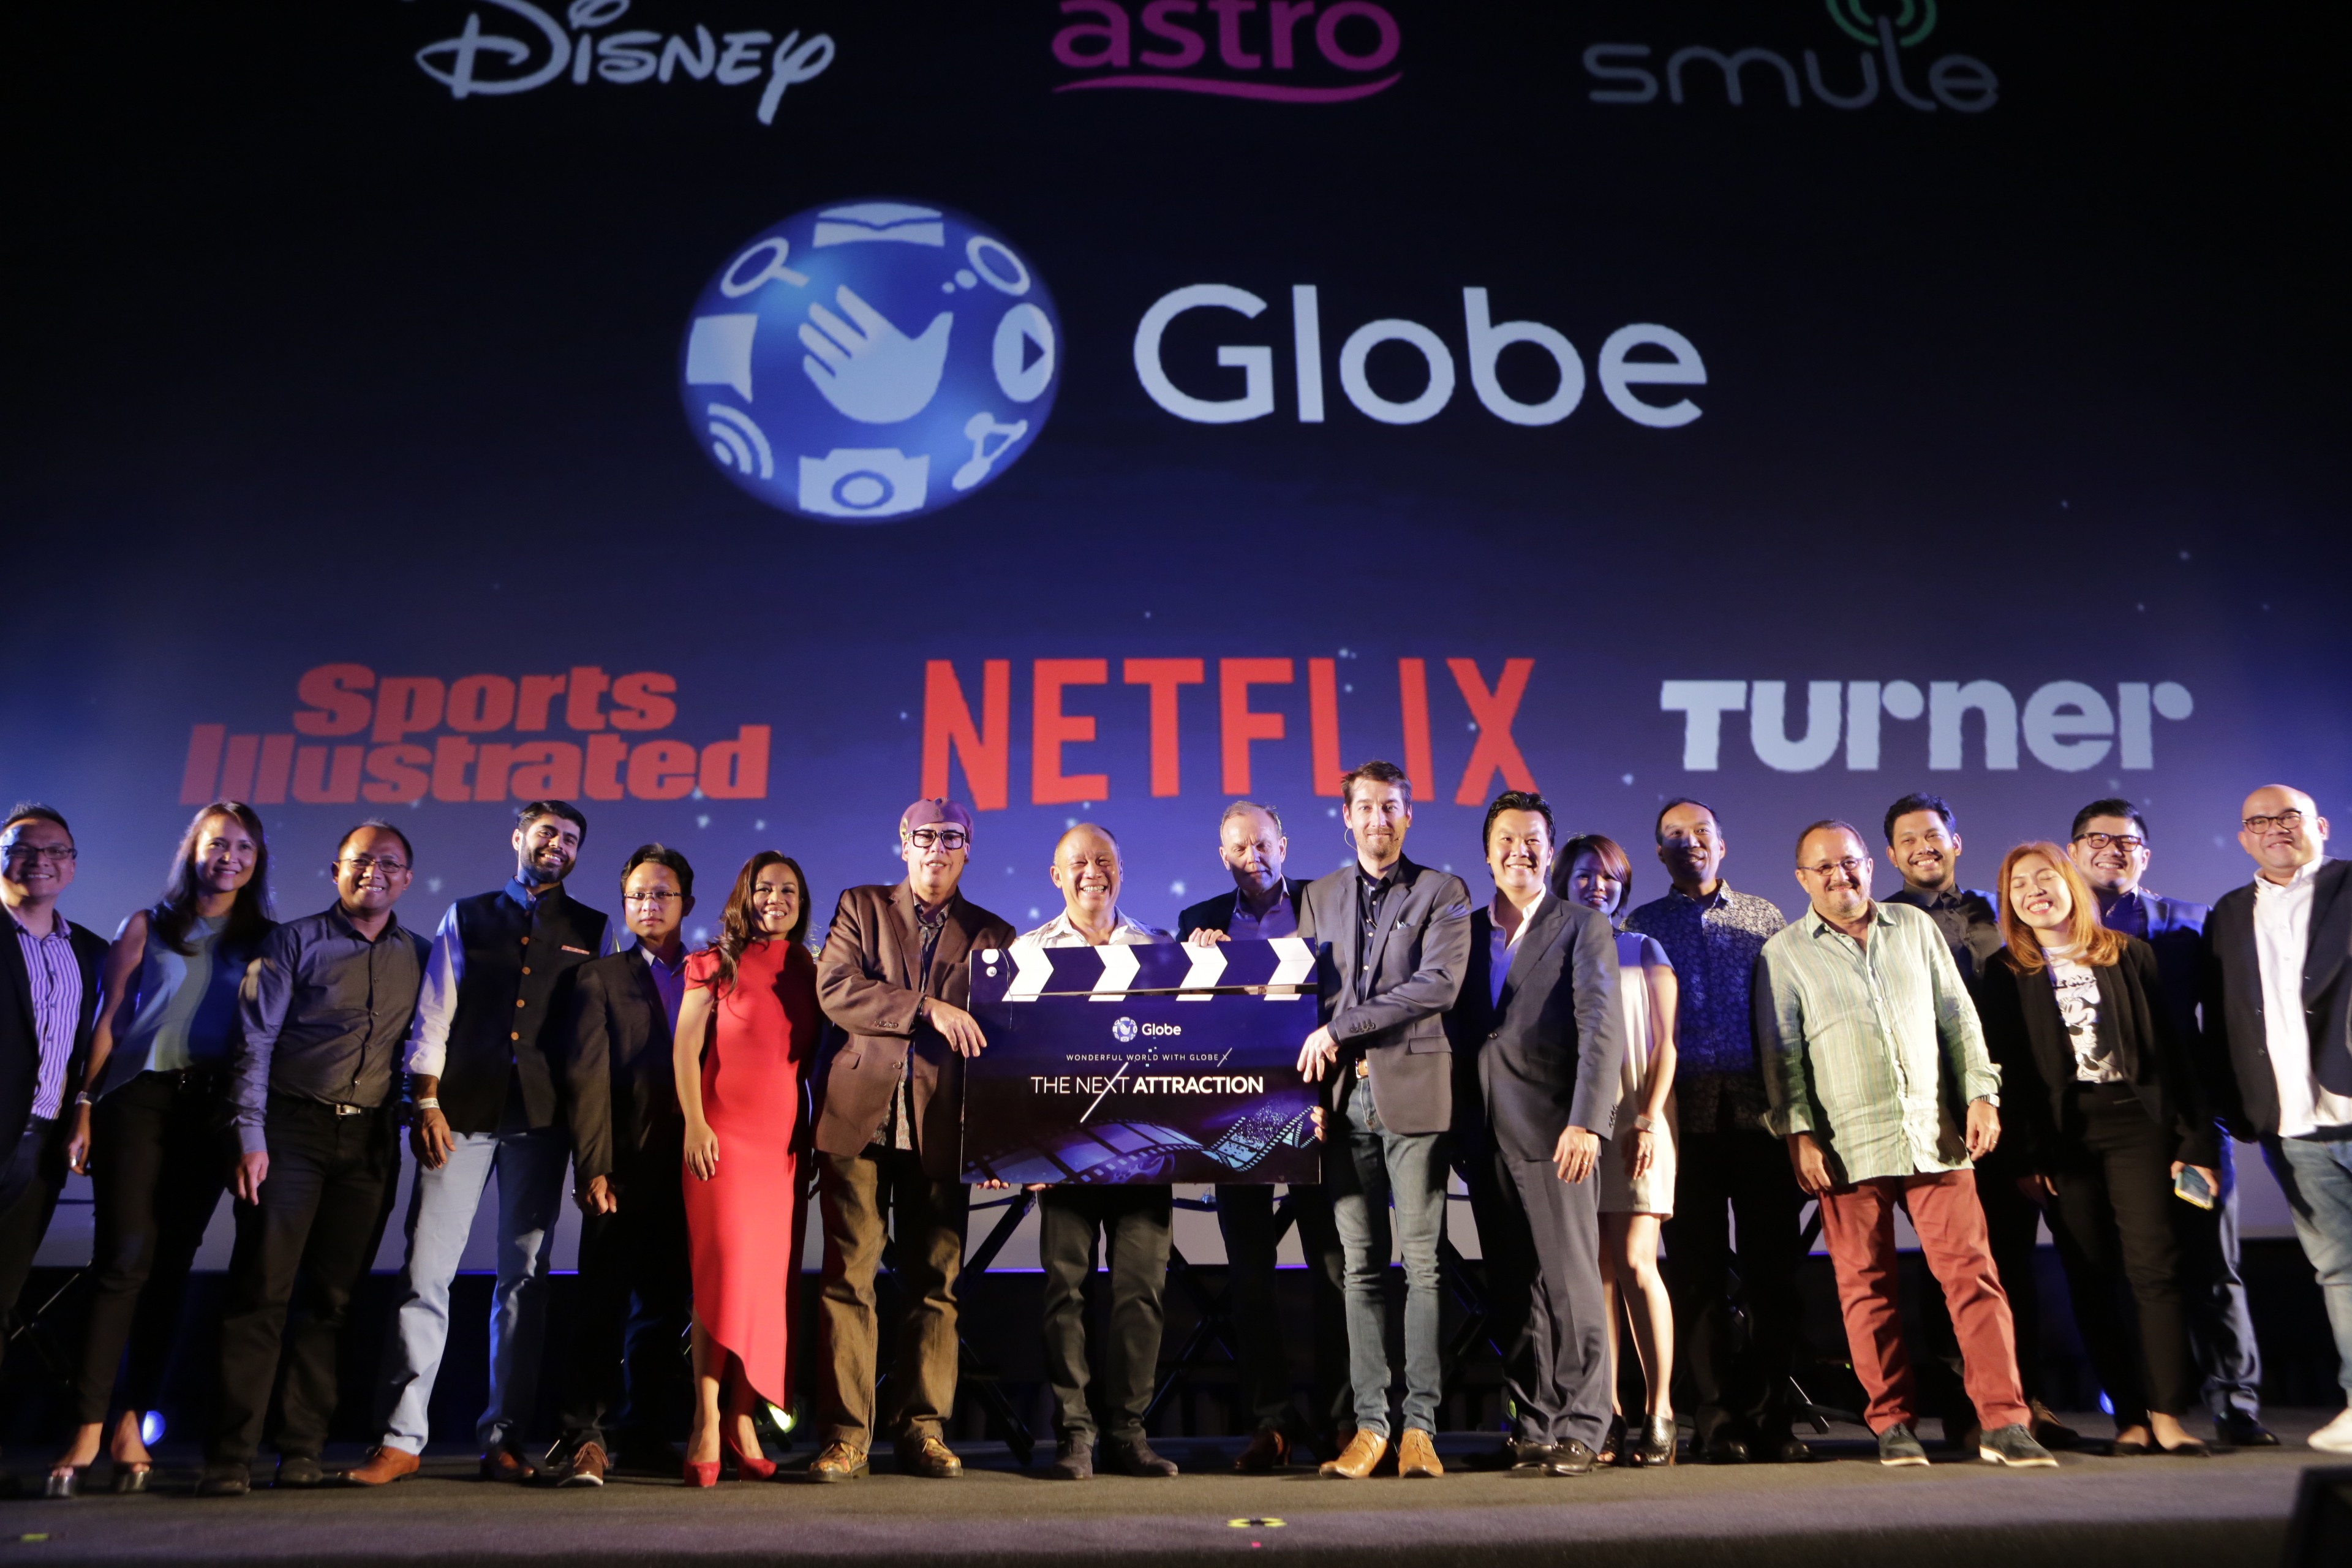 Globe newest roster of content partners will bring out the best of Philippine digital lifestyle. Photo above shows Globe Executives with new content partners from Disney, Astro, Turner, Smule, Sports Illustrated and Netflix.